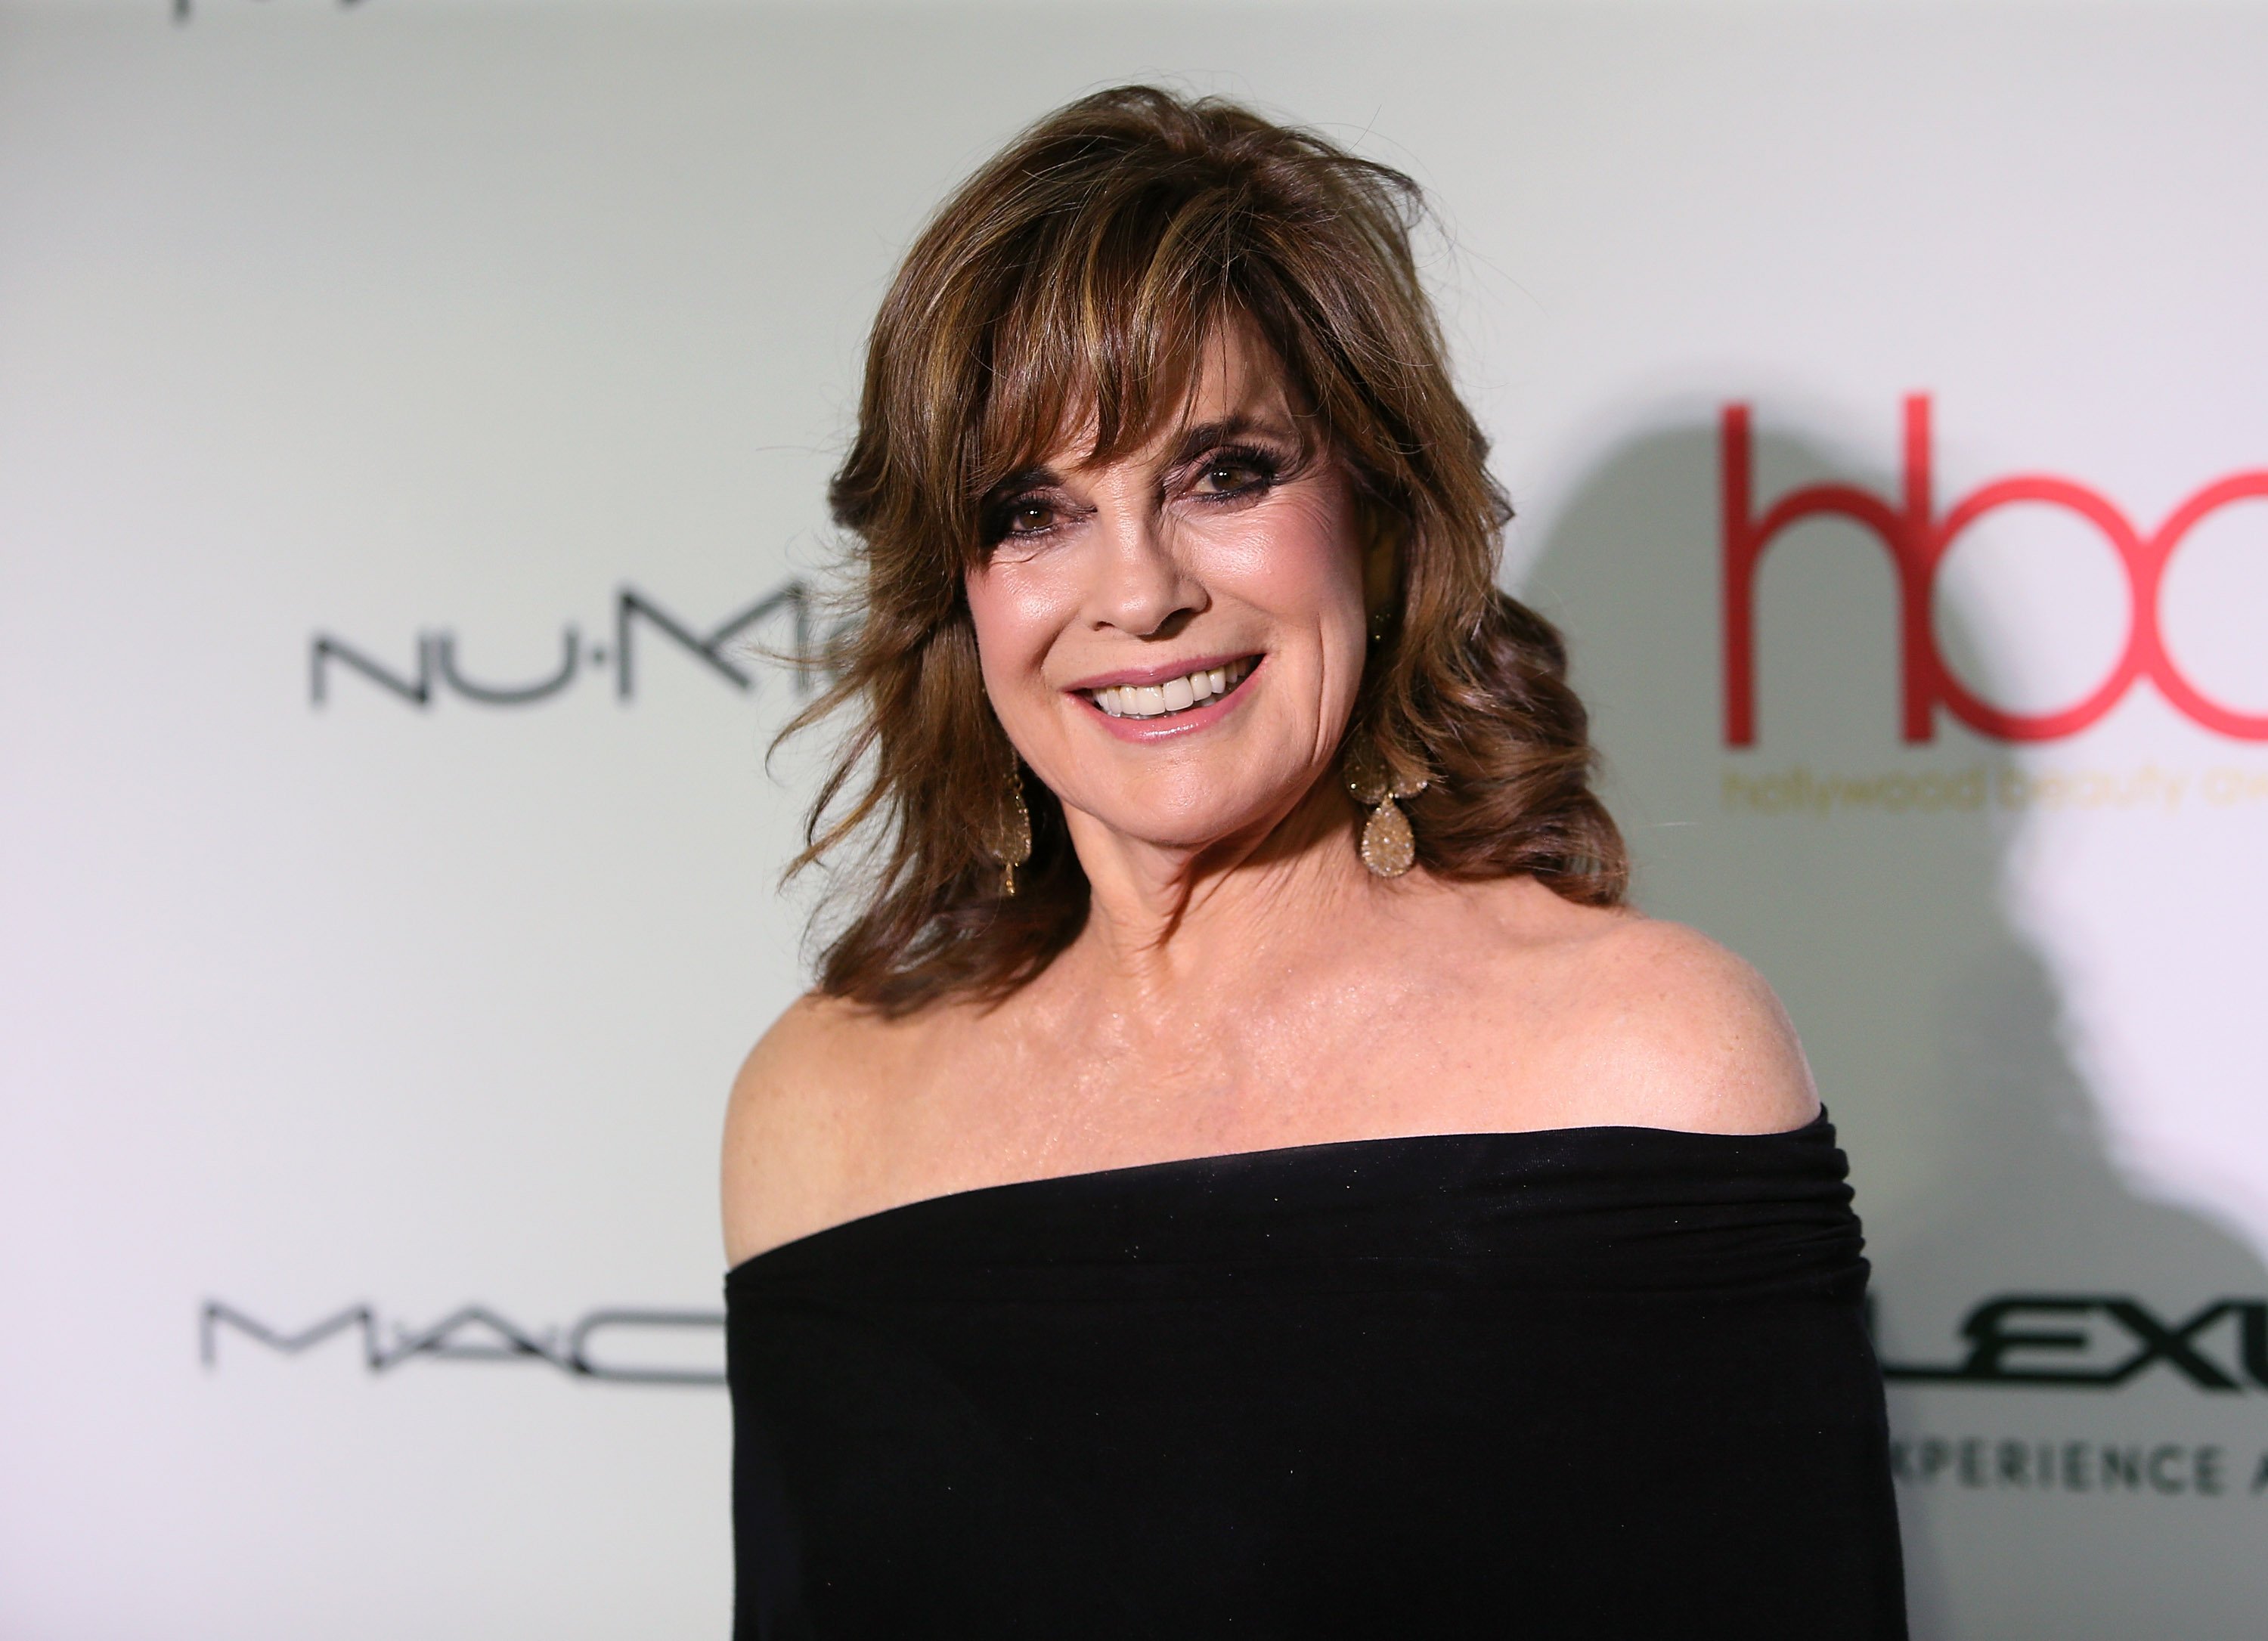 Actress Linda Gray attends the 3rd Annual Hollywood Beauty Awards at Avalon Hollywood on February 19, 2017 in Los Angeles, California. | Source: Getty Images